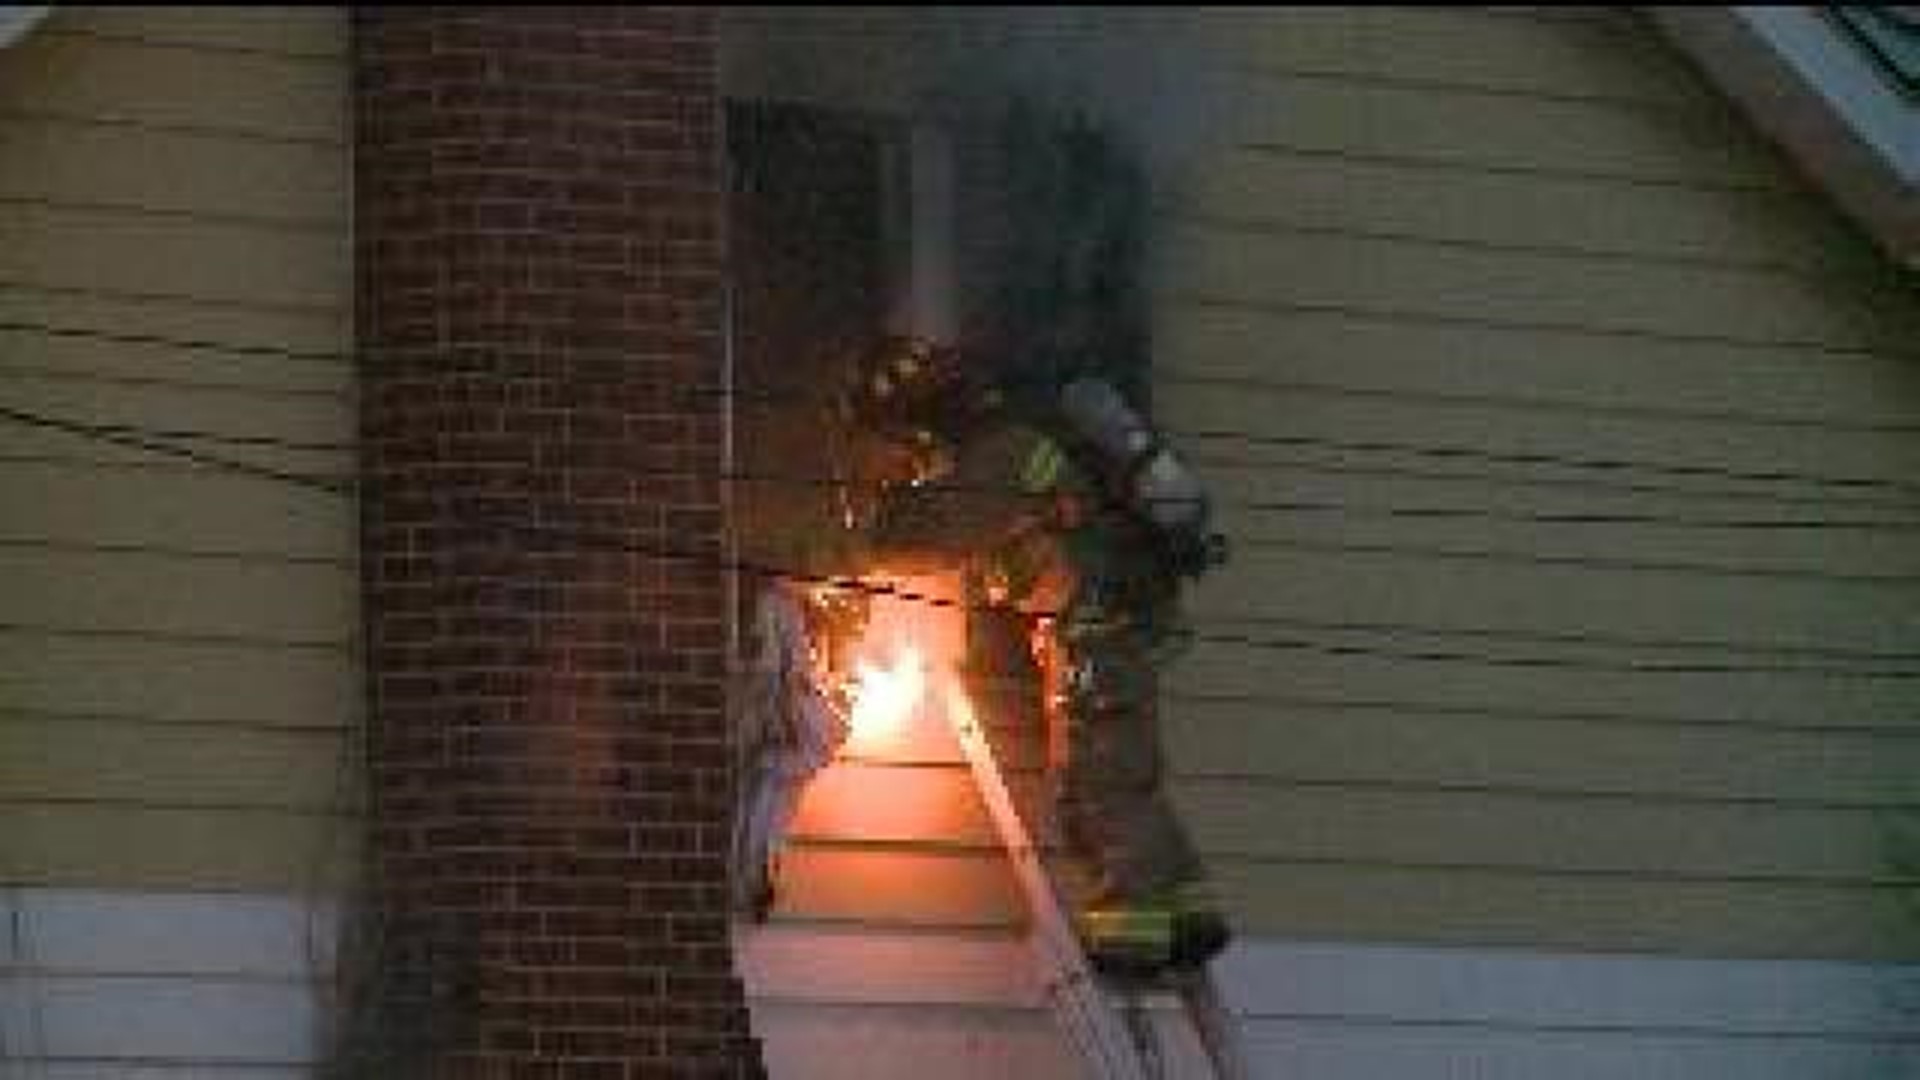 Mother Jumps from burning home